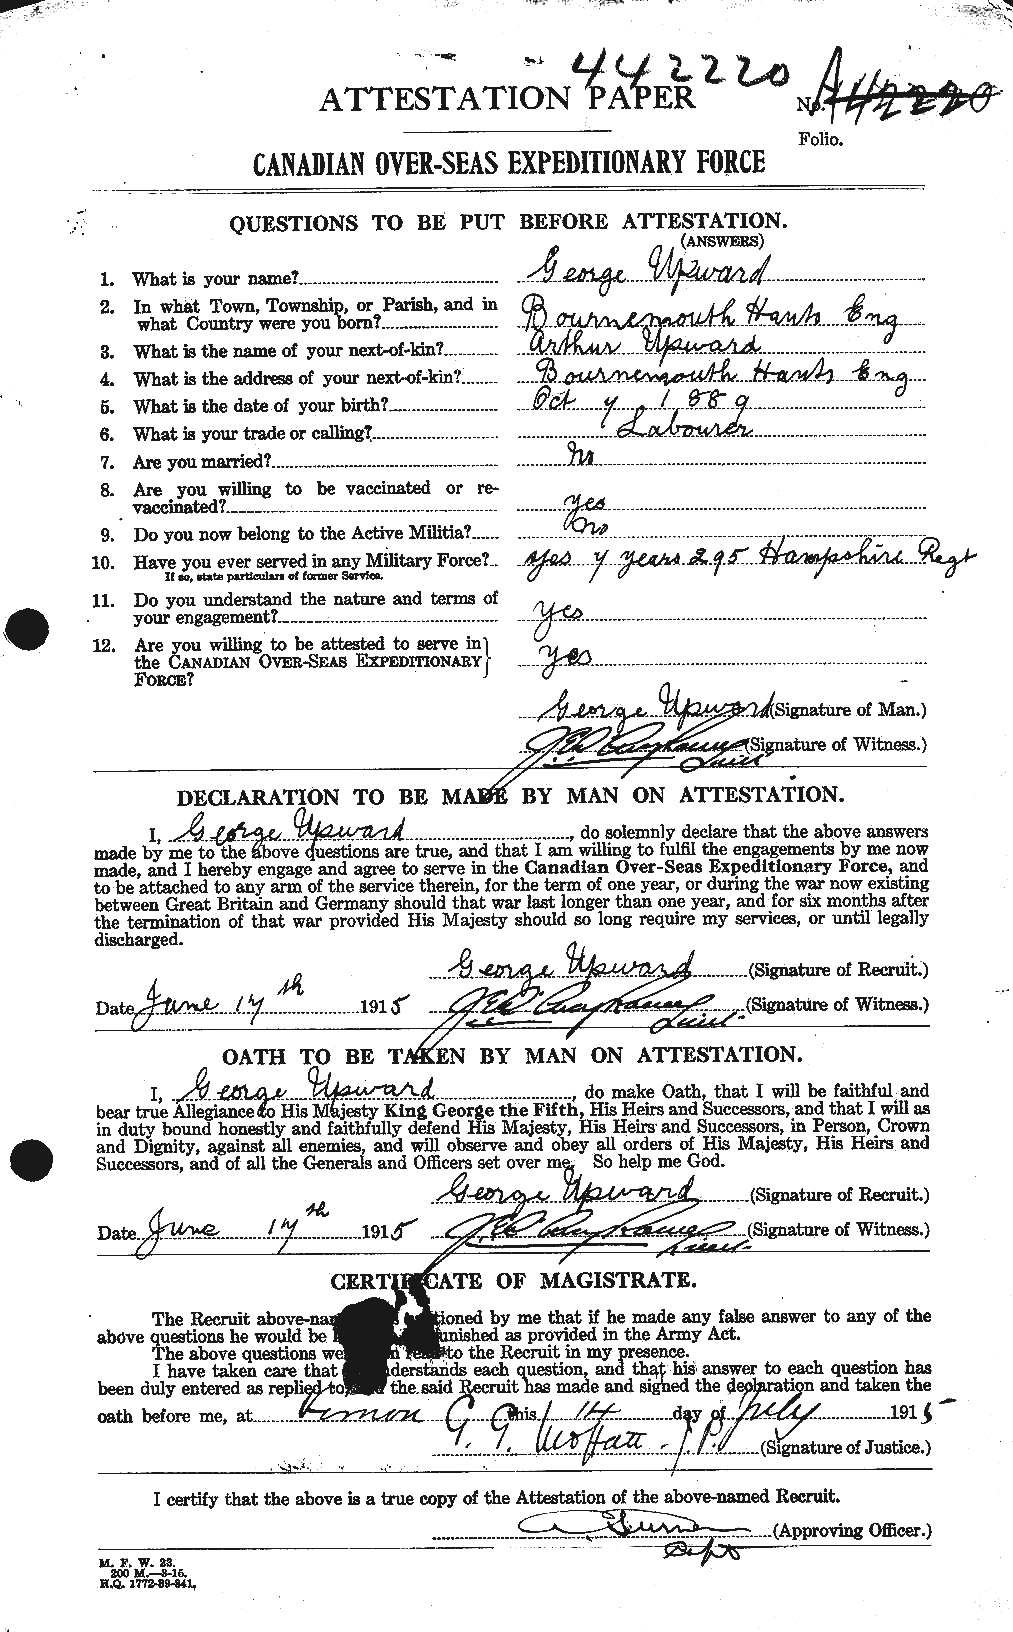 Personnel Records of the First World War - CEF 643197a